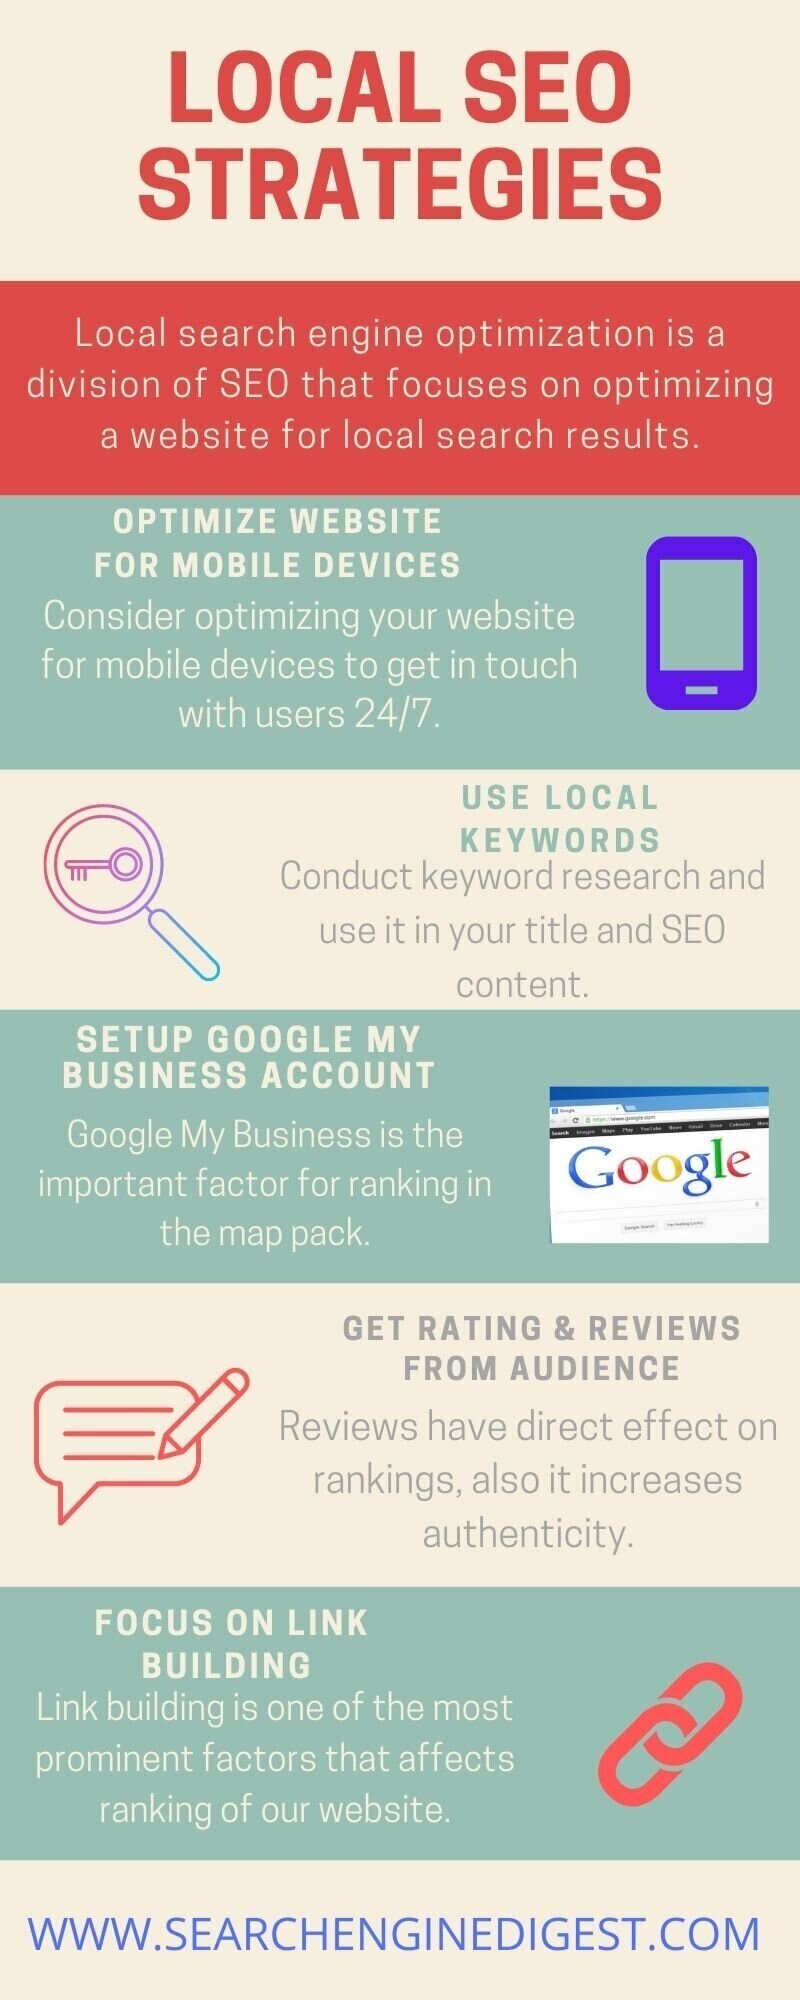 local seo and how to improve it - infographic